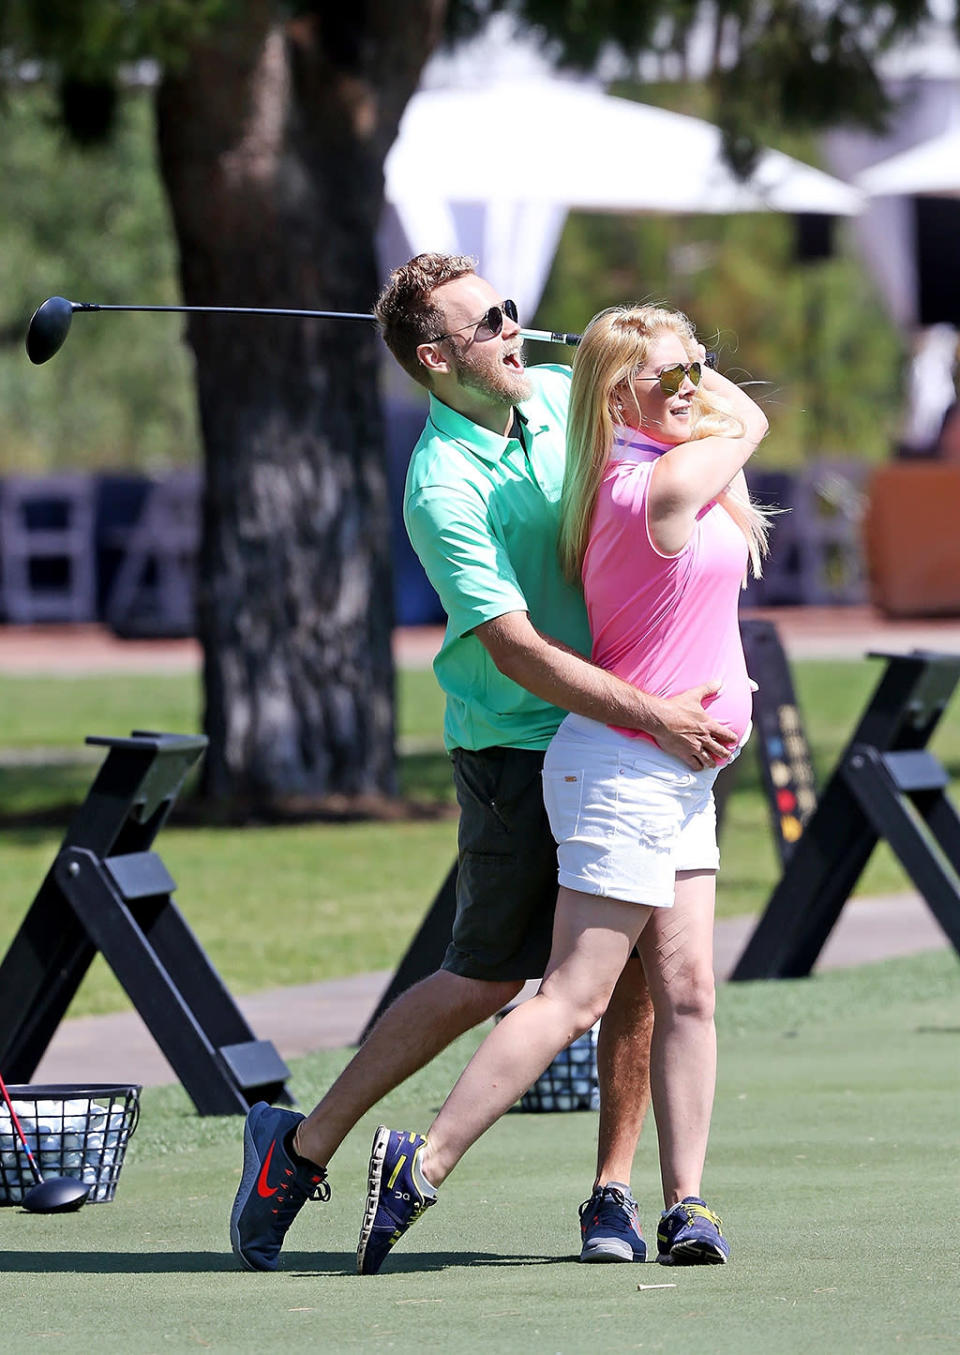 <p>However, the pregnancy has not kept Heidi from getting out there to hit the links and, of course, be photographed. After all, this is the couple that literally wrote the book on <a rel="nofollow noopener" href="https://www.amazon.com/How-Be-Famous-Looking-Becoming/dp/B003D7JTJU" target="_blank" data-ylk="slk:how to be famous" class="link rapid-noclick-resp">how to be famous</a>. (Photo: Mr Plow/BACKGRID) </p>